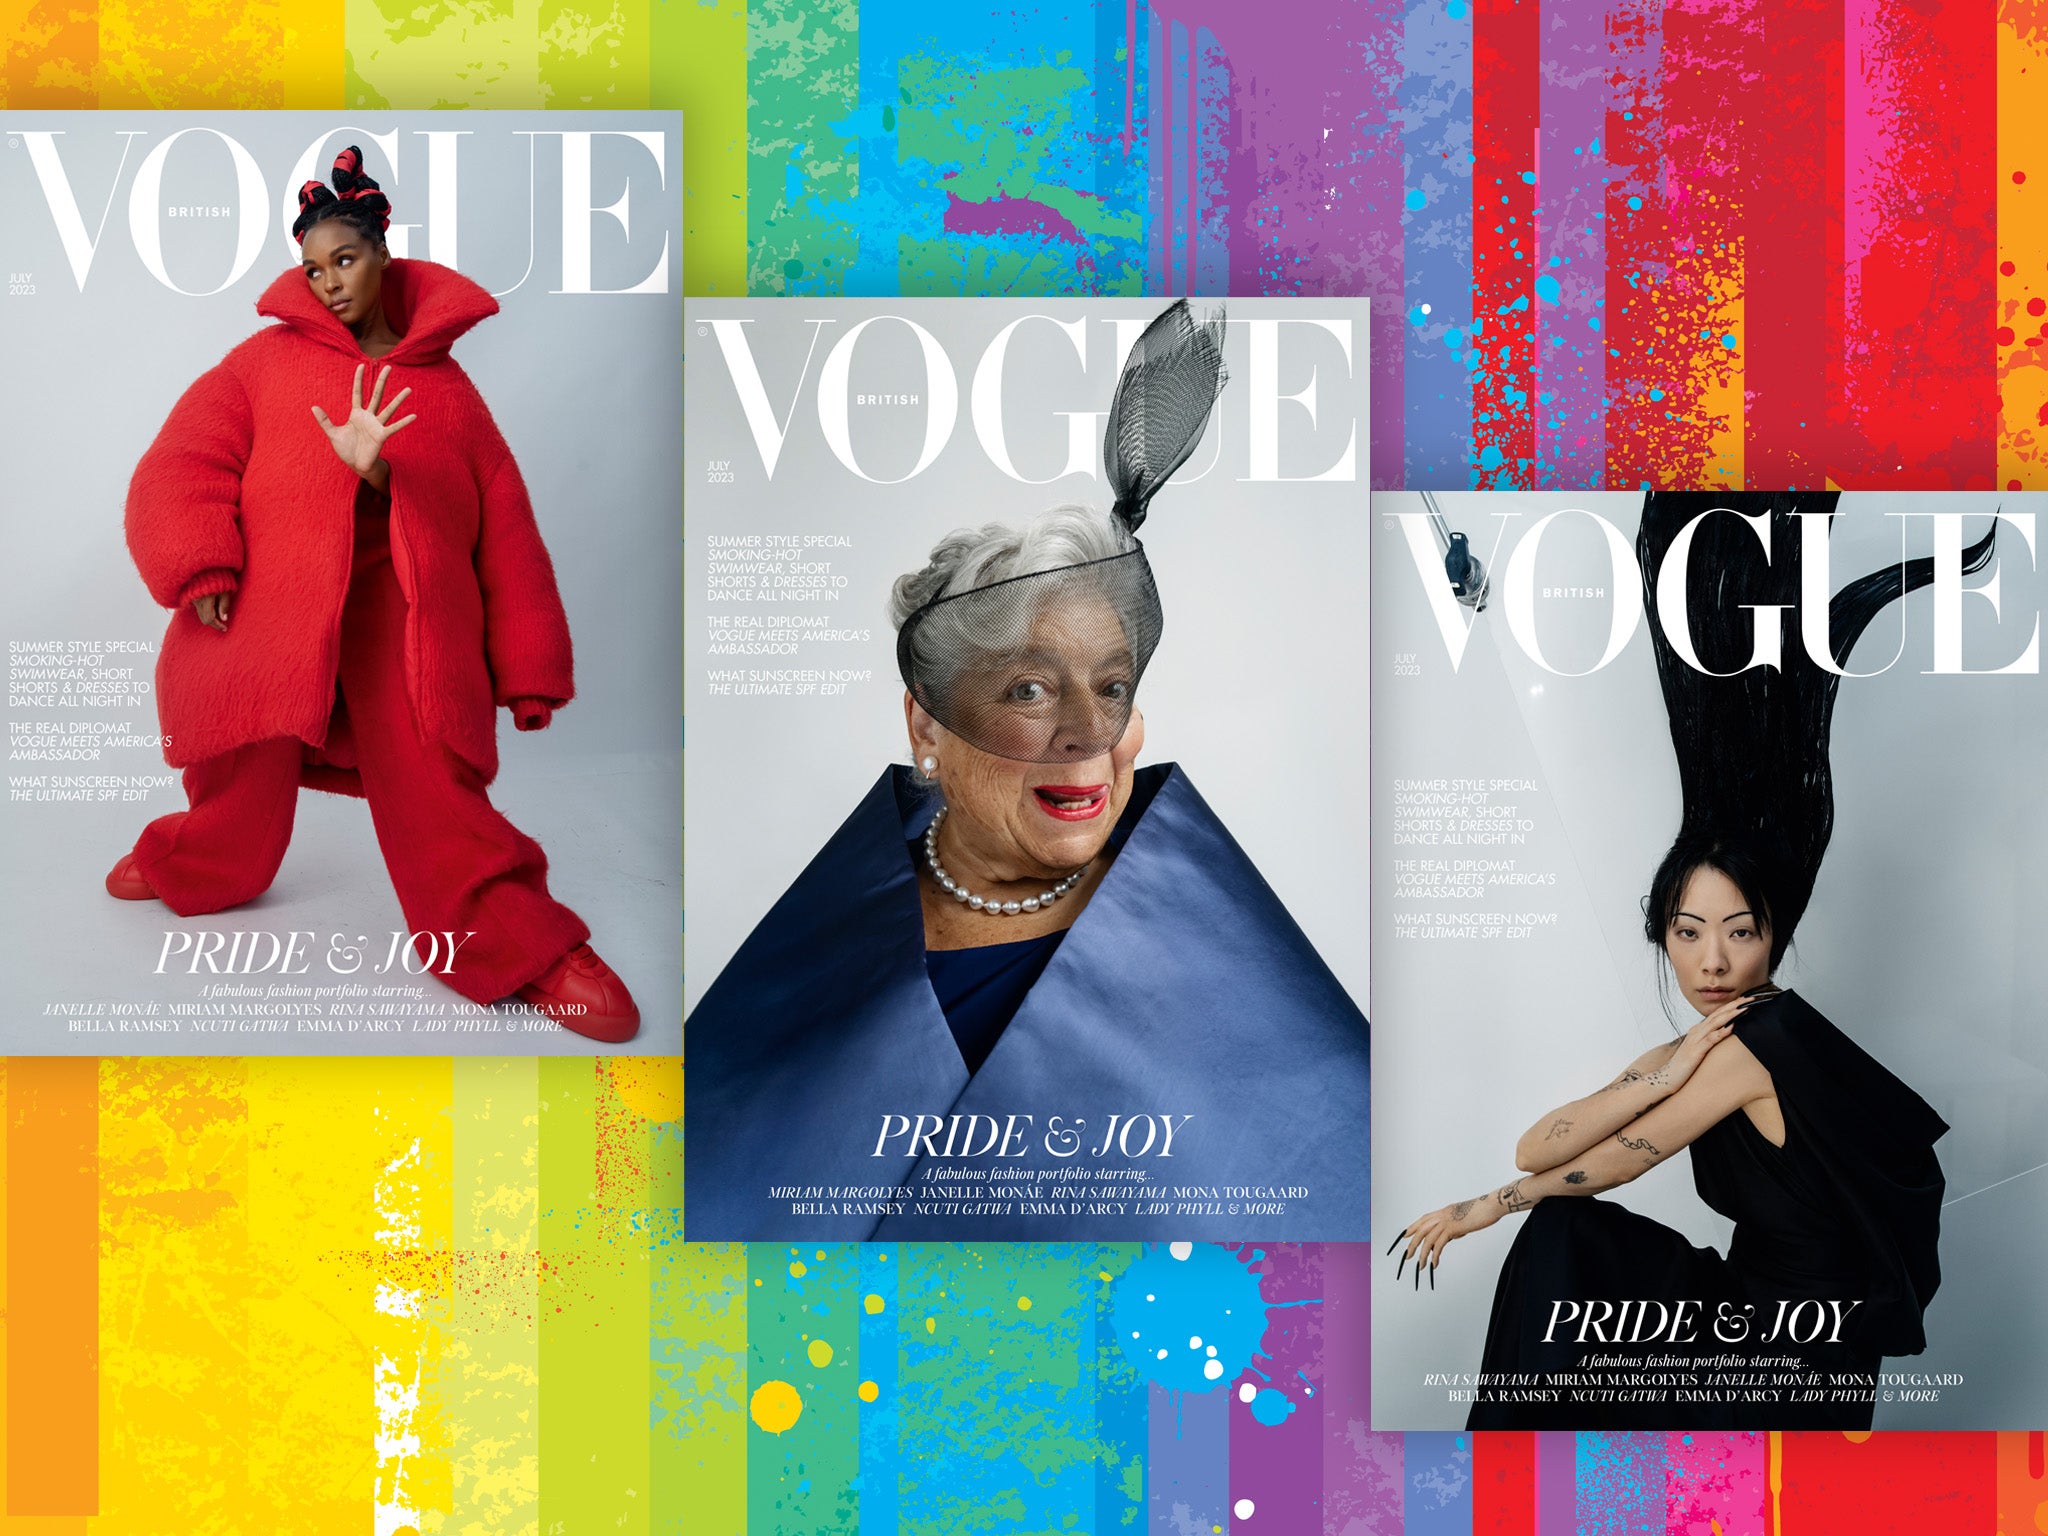 Miriam Margolyes, 82, poses topless on Vogue’s Pride Month cover